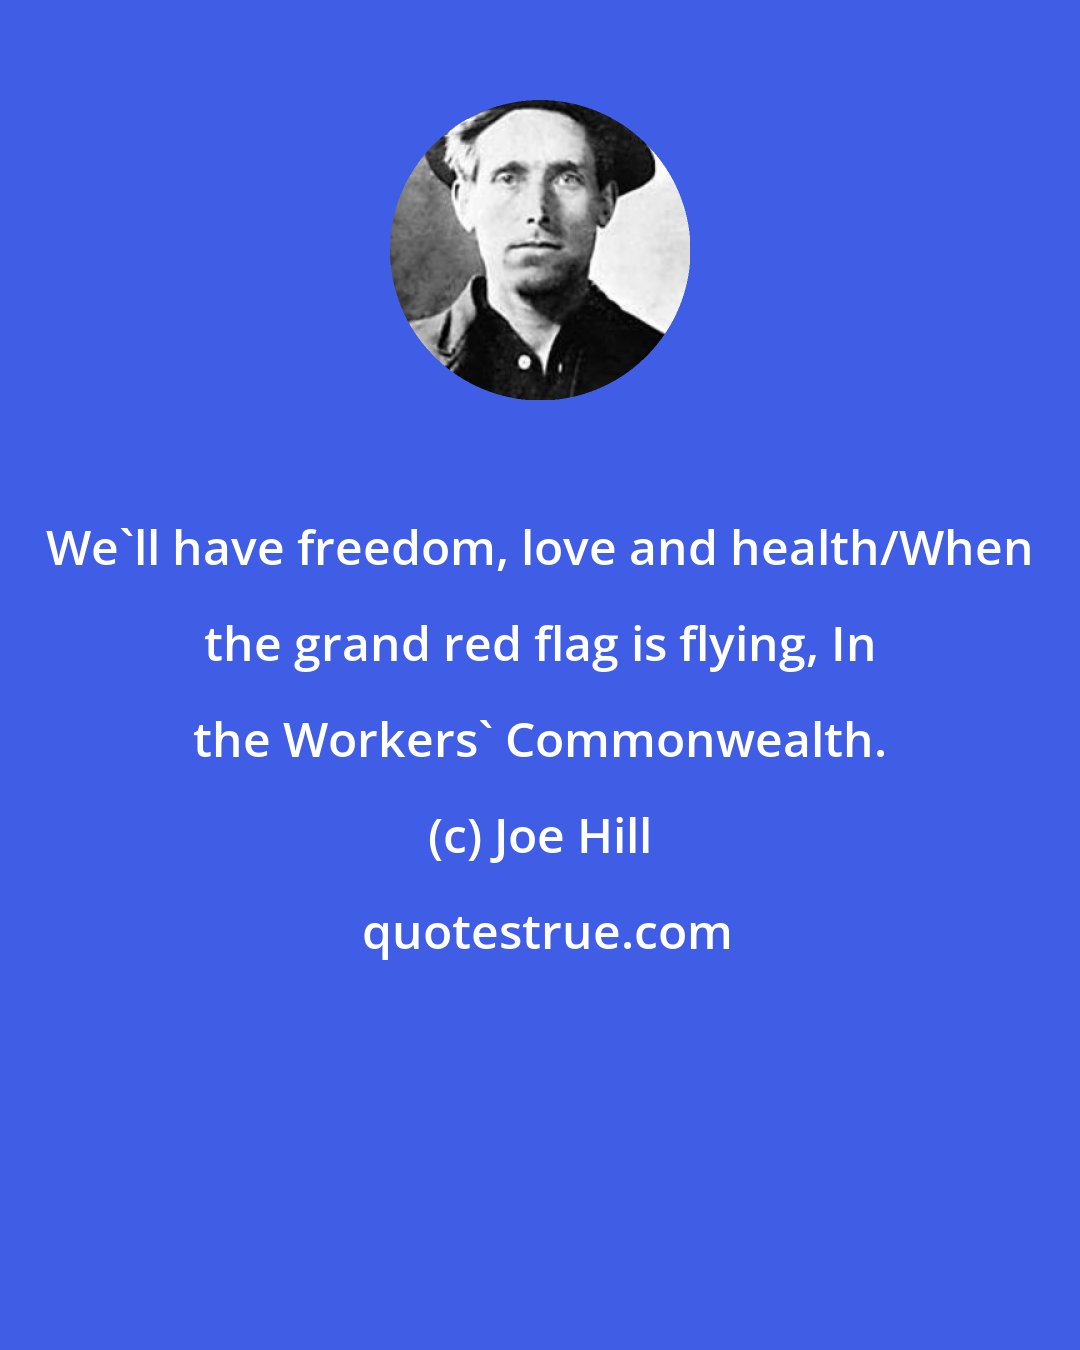 Joe Hill: We'll have freedom, love and health/When the grand red flag is flying, In the Workers' Commonwealth.